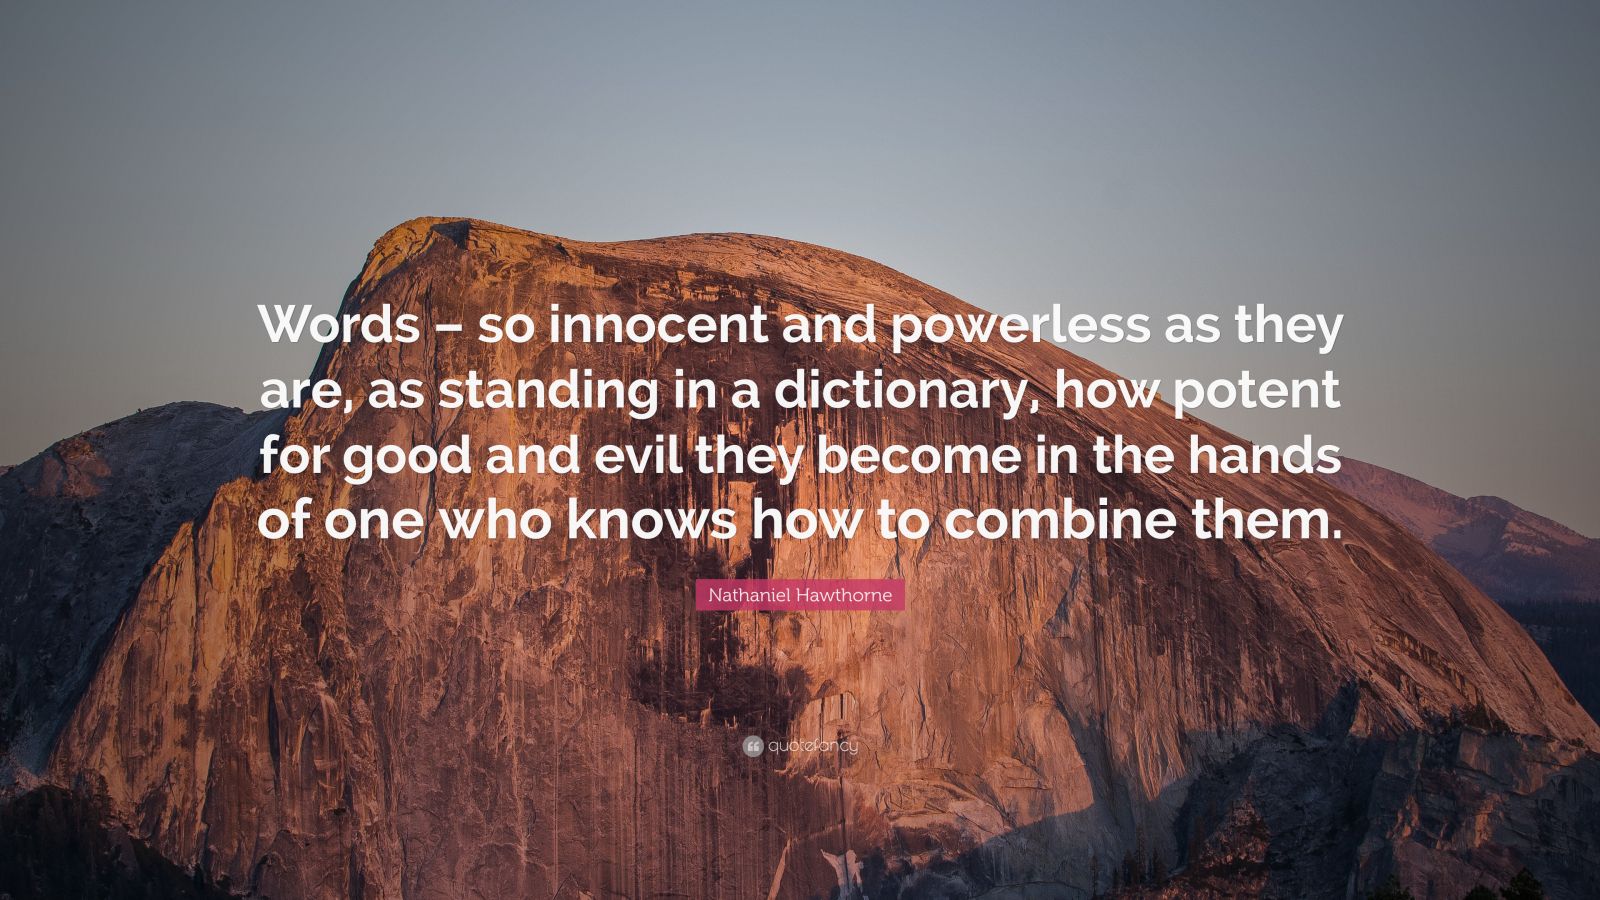 Essay On Good And Evil In Nathaniel Hawthornes The